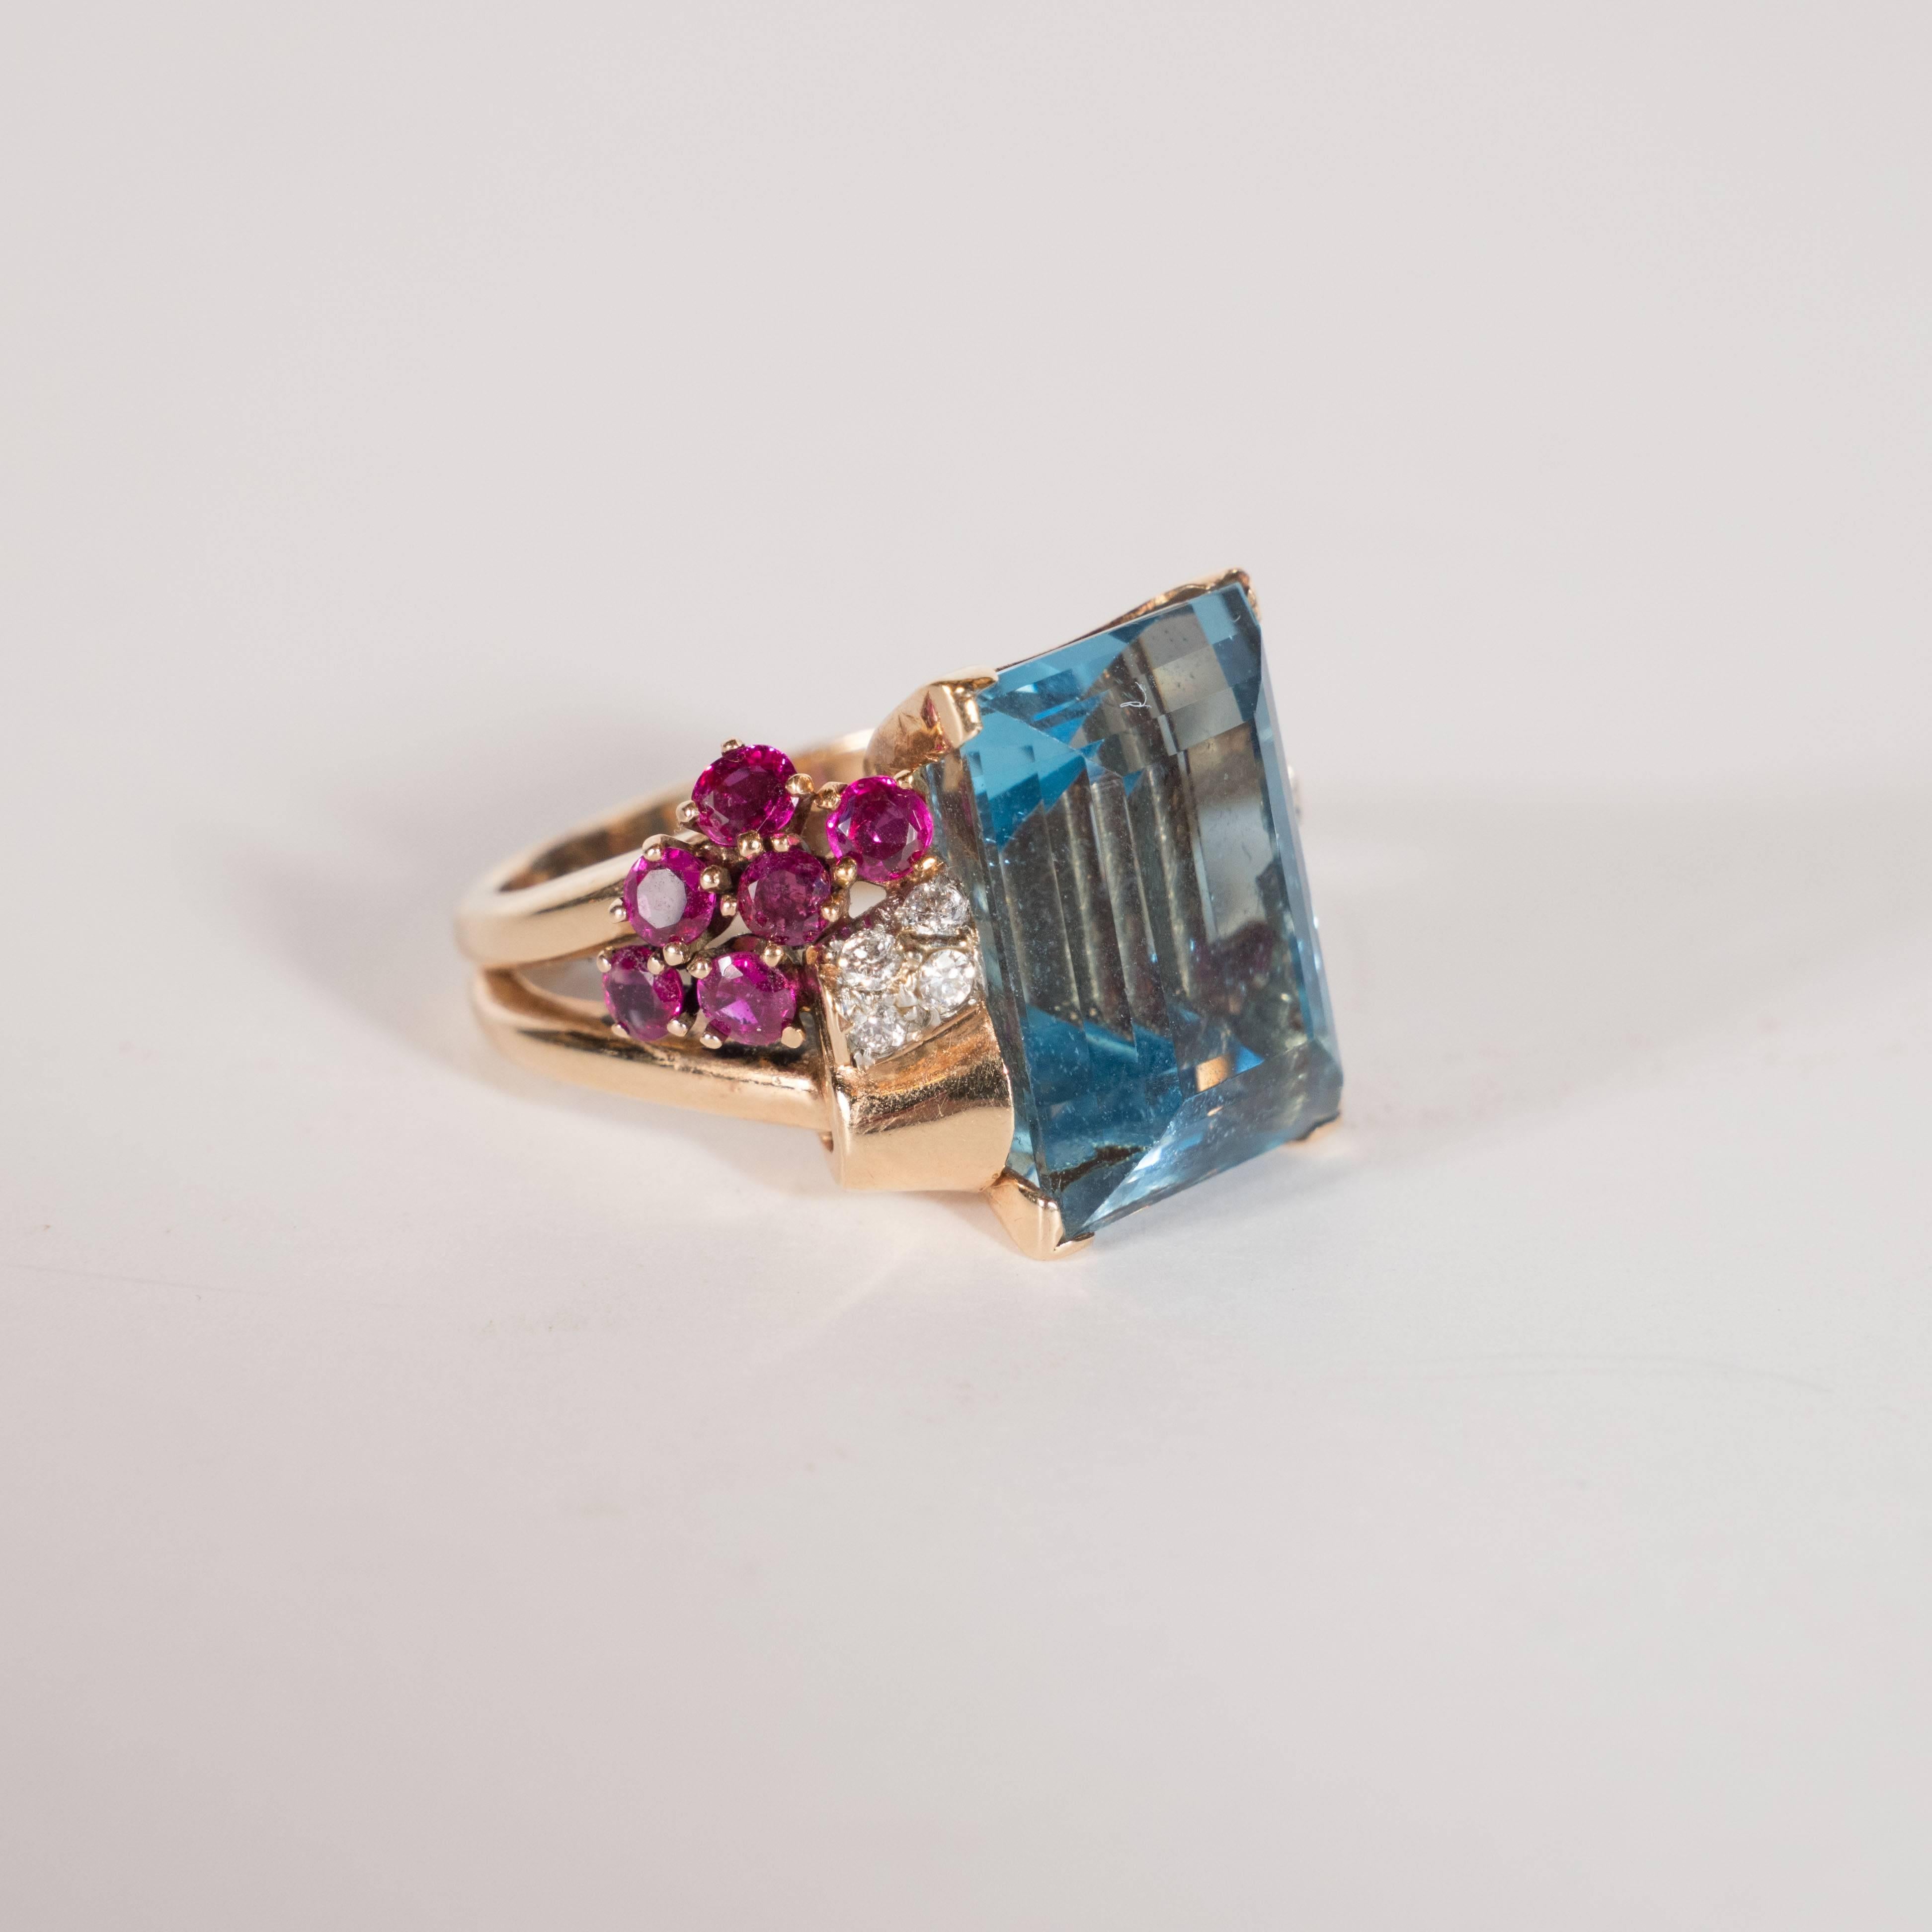 1940s American 8 Carat Acquamarine and 14k Gold Ring with Rubies and Diamonds 2